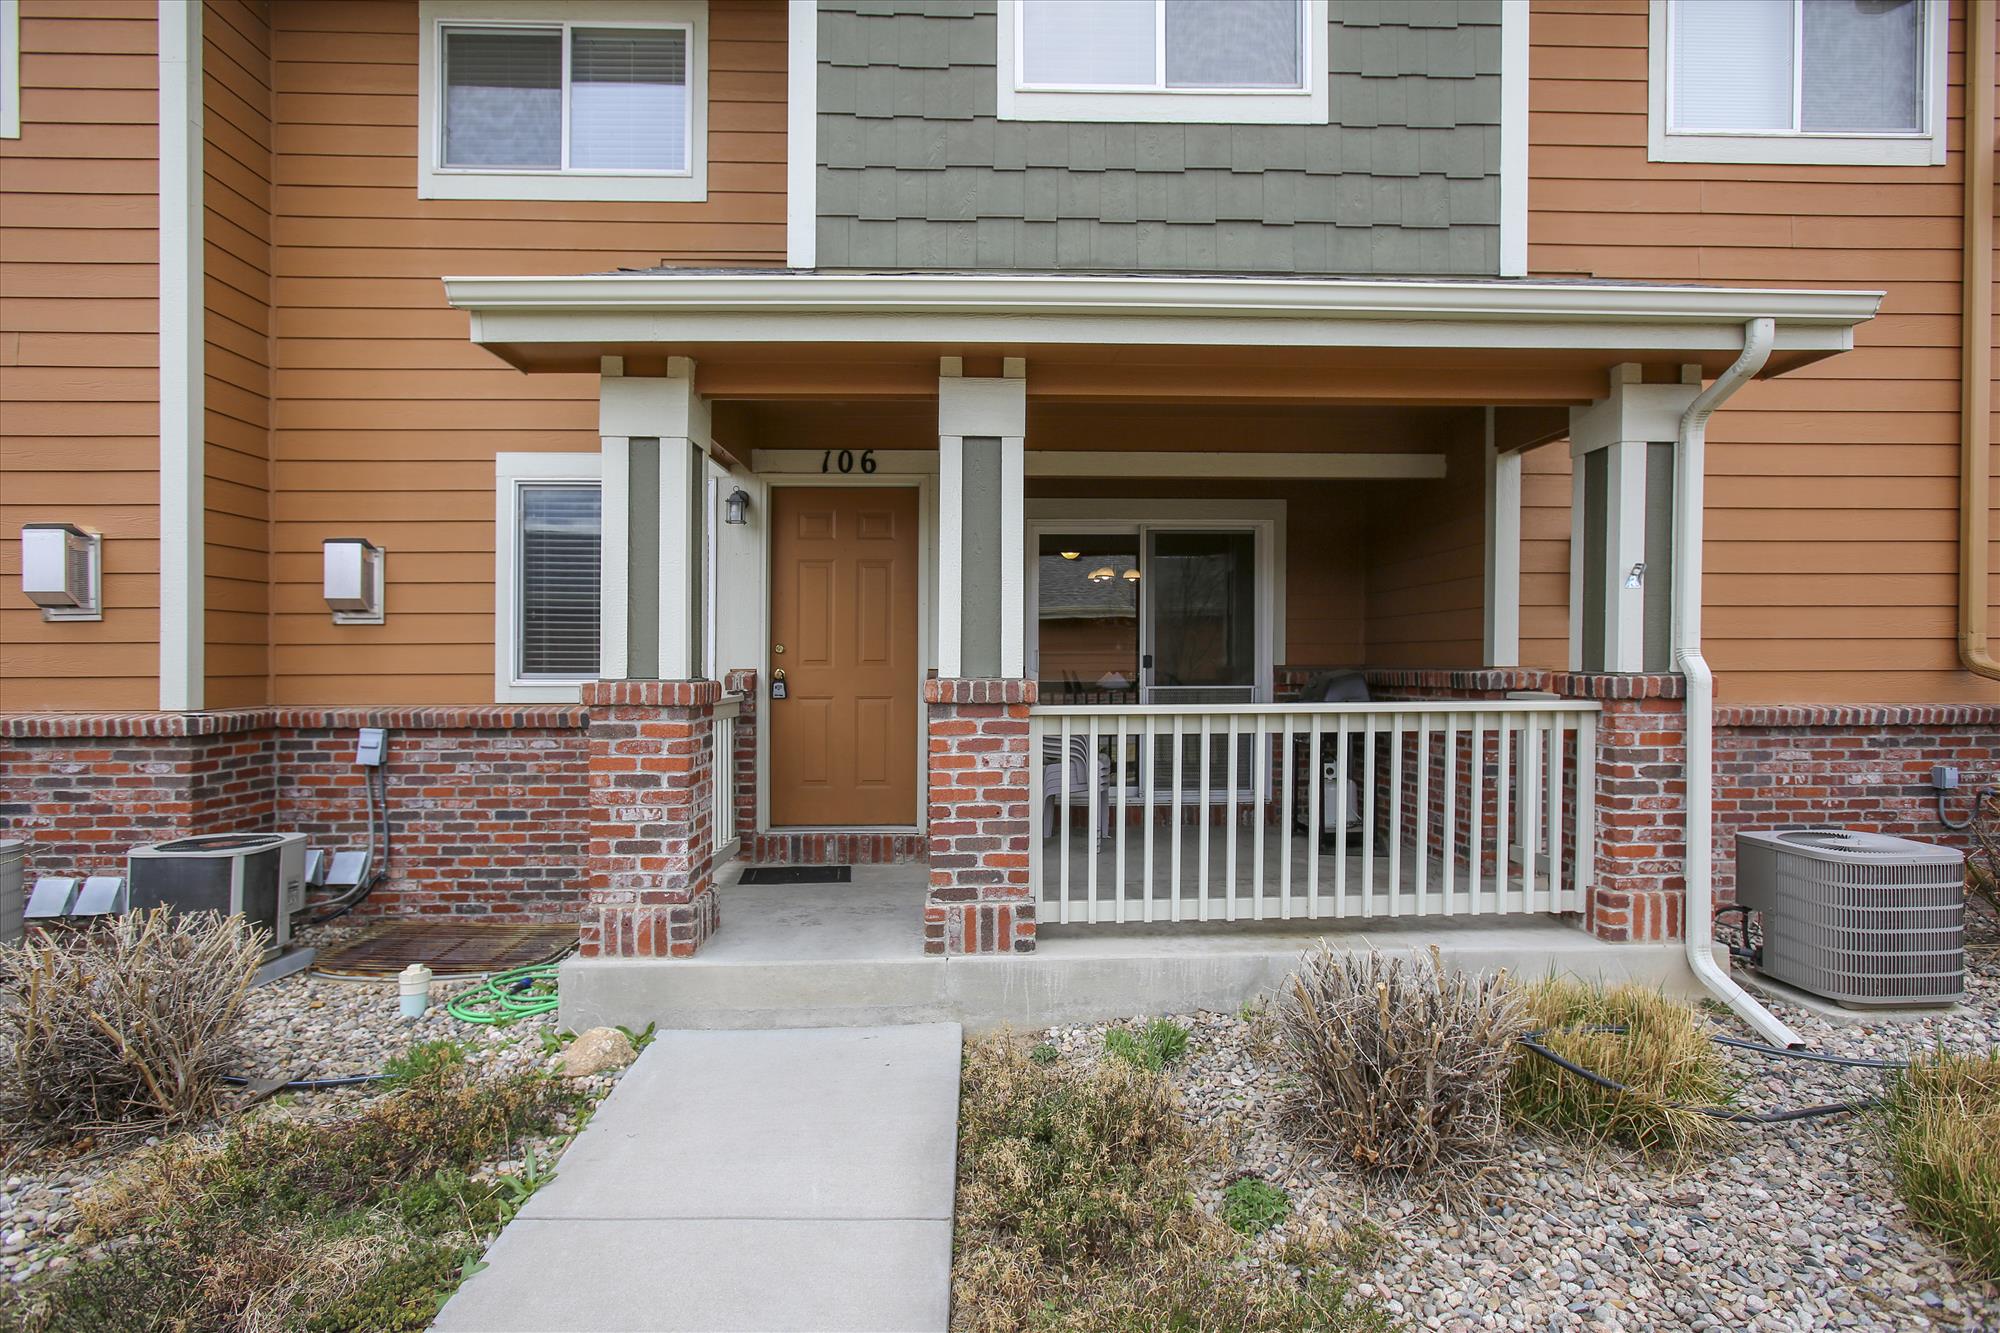 Loveland, Colorado, 80537, 2 Bedrooms Bedrooms, ,2 BathroomsBathrooms,Townhome,Furnished,Carina Circle Unit #106,1046